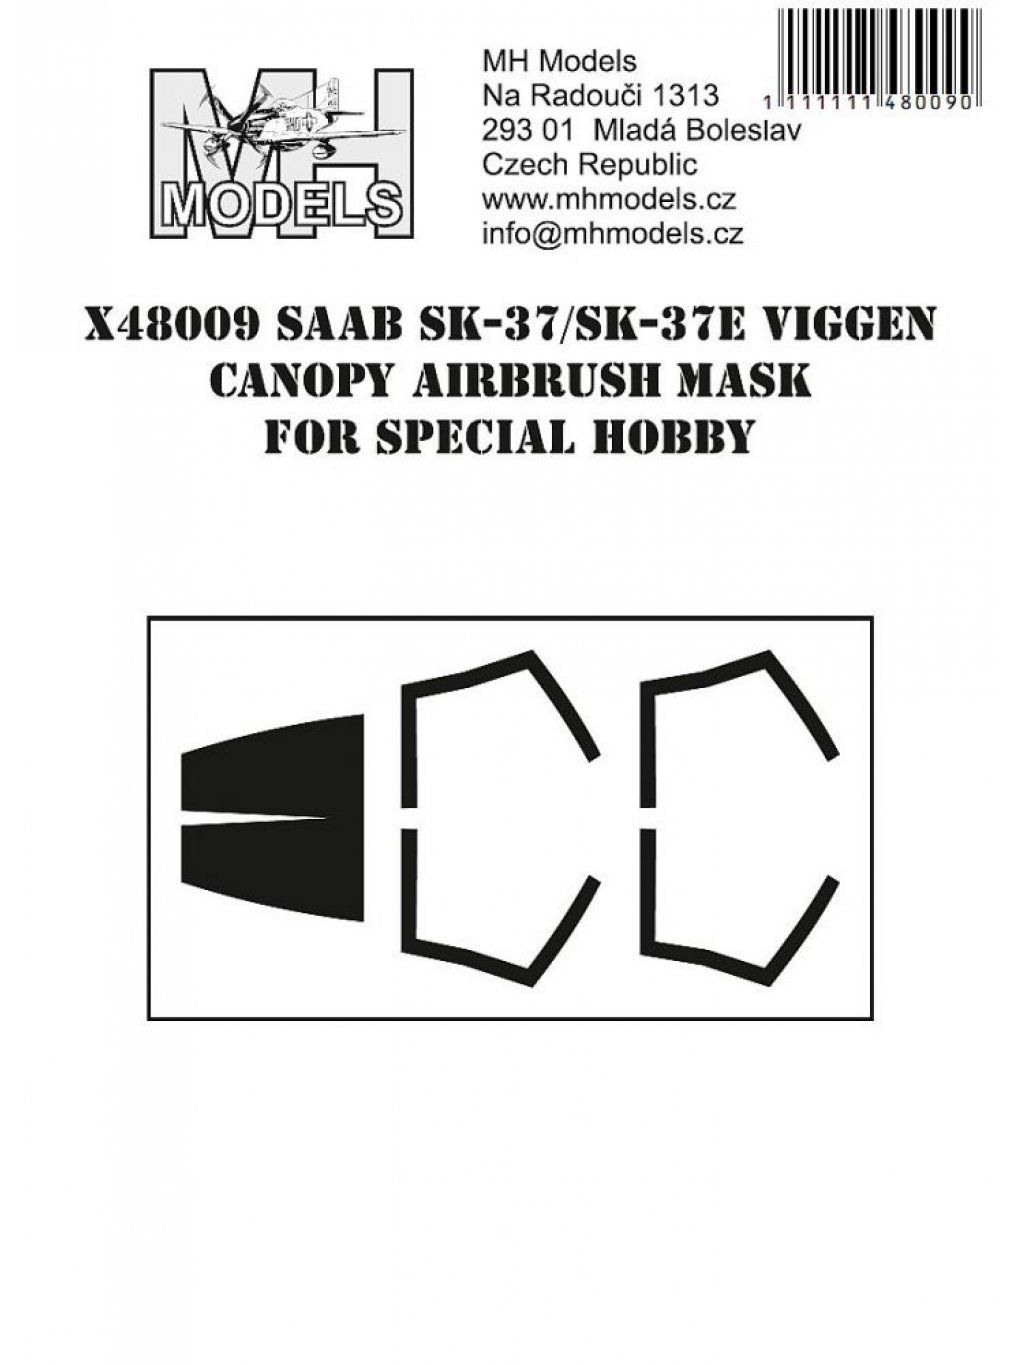 SAAB SK-37/SK-37E Viggen canopy airbrush mask for Special Hobby